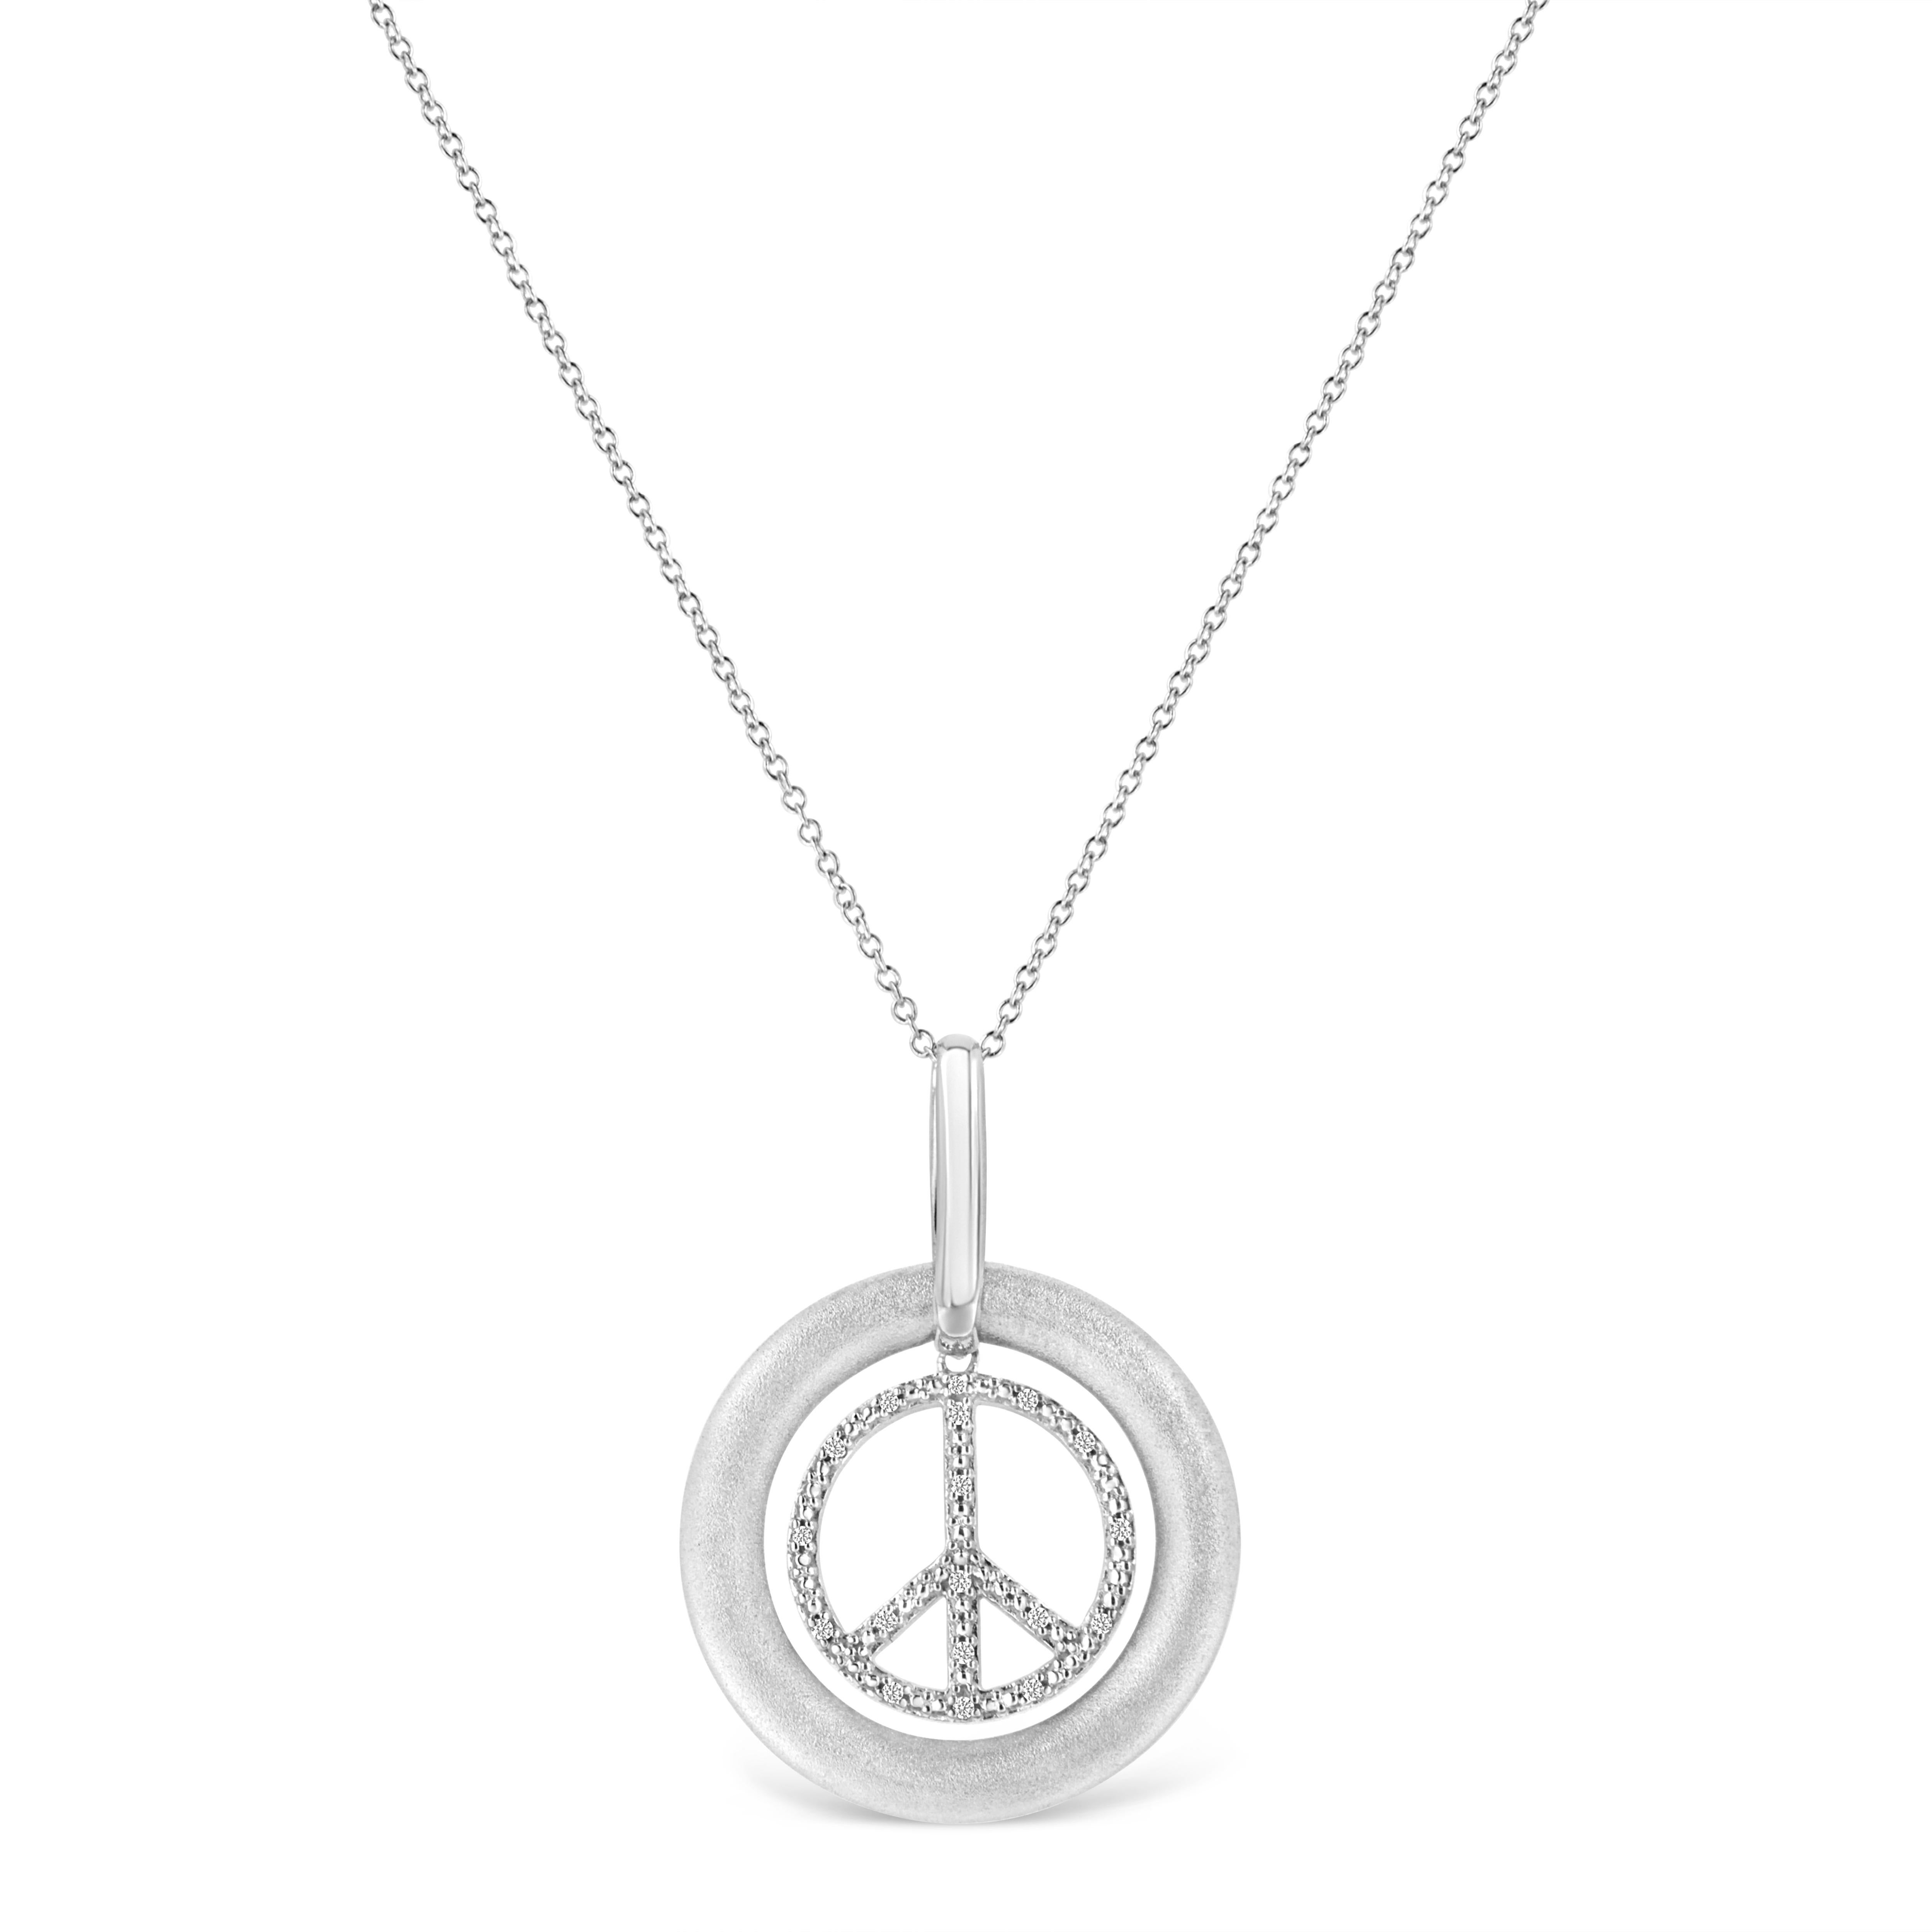 Elegant and simple, this pewter diamond peace sign pendant spreads the message of peace in the world. This icy fiery sterling silver pendant is embellished with 18 dazzling prong set single cut diamonds accents inside a large sterling silver circle.